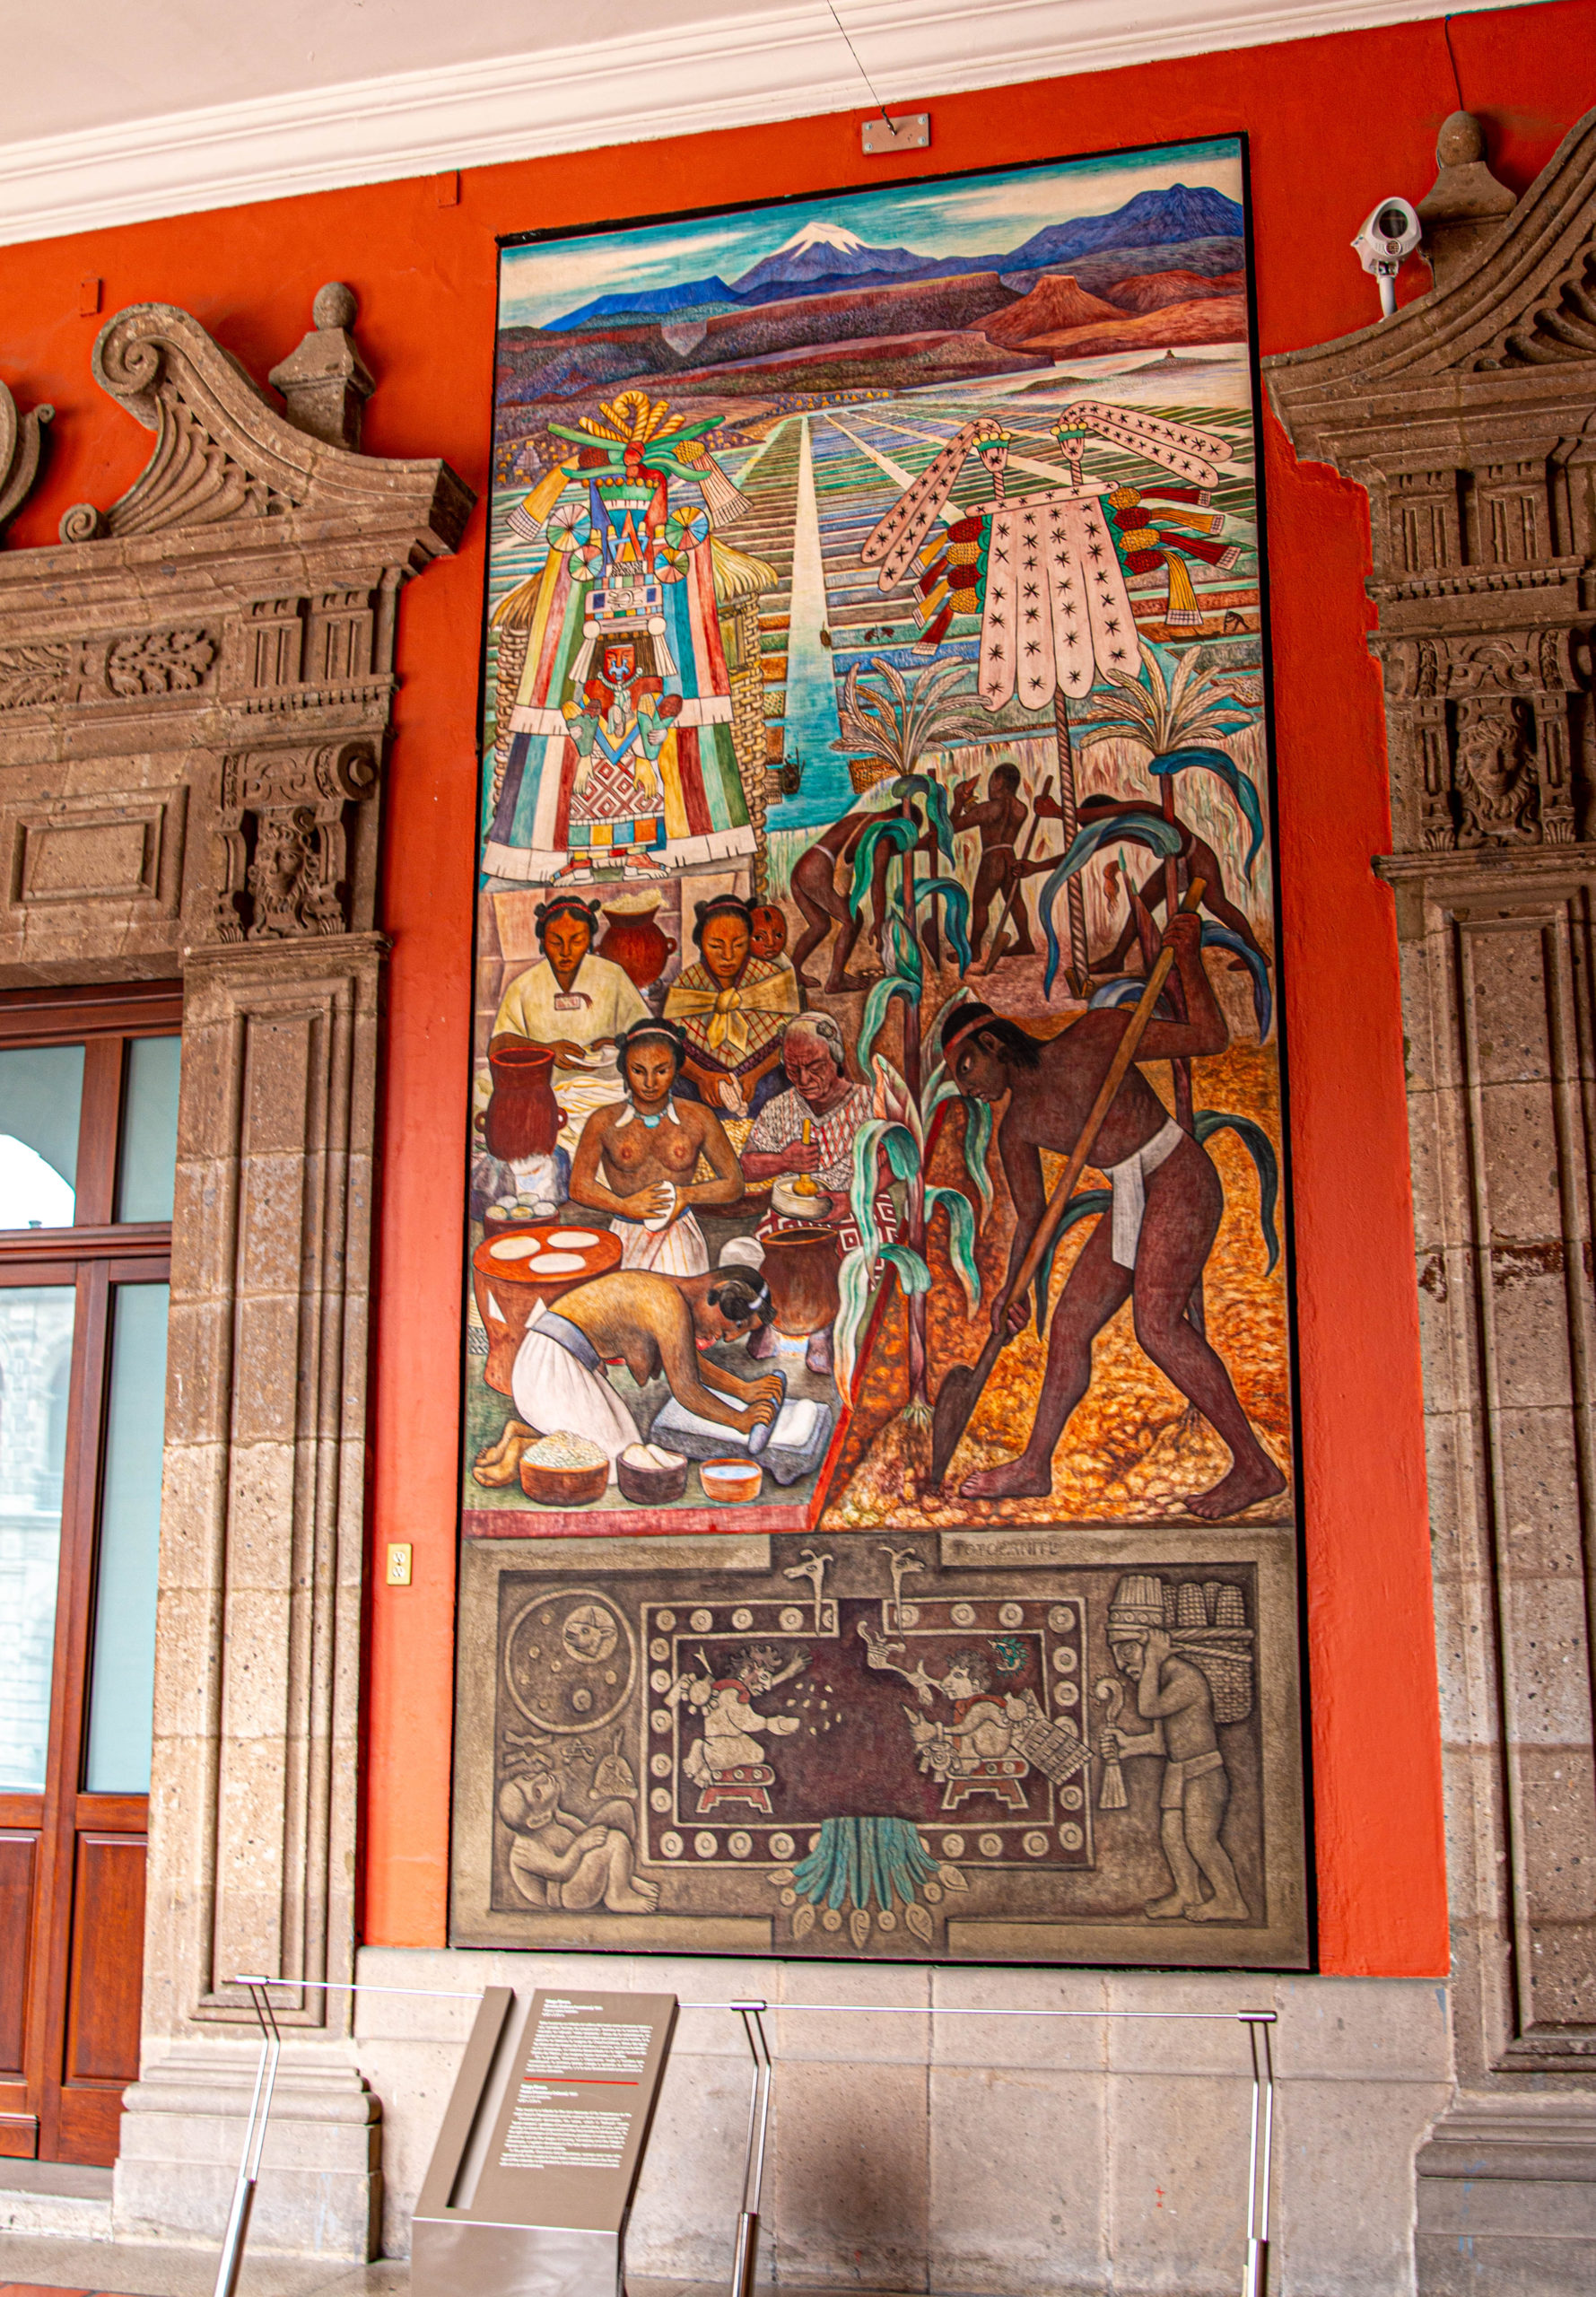 Diego Rivera mural in Palacio Nacional, one of many must-visit museums in Mexico city, CDMX